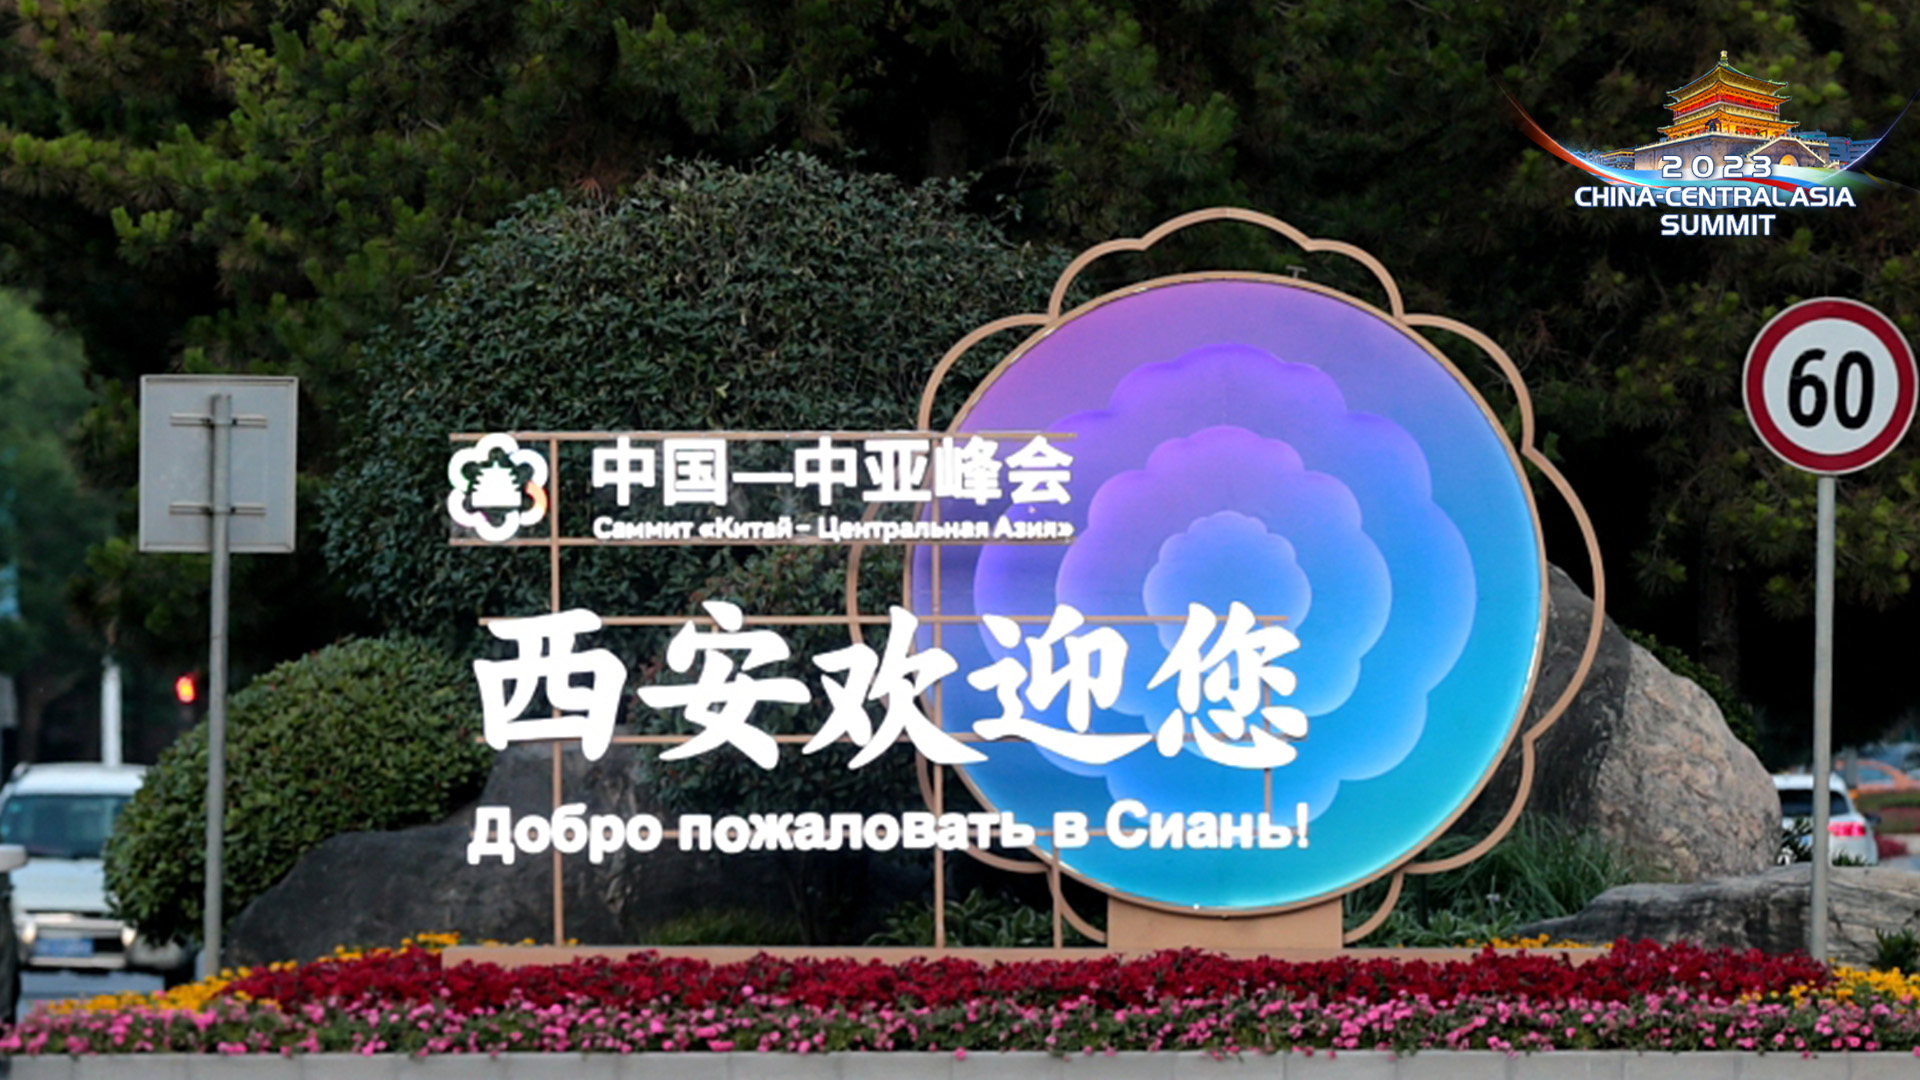 Watch: Special program on China-Central Asia Summit